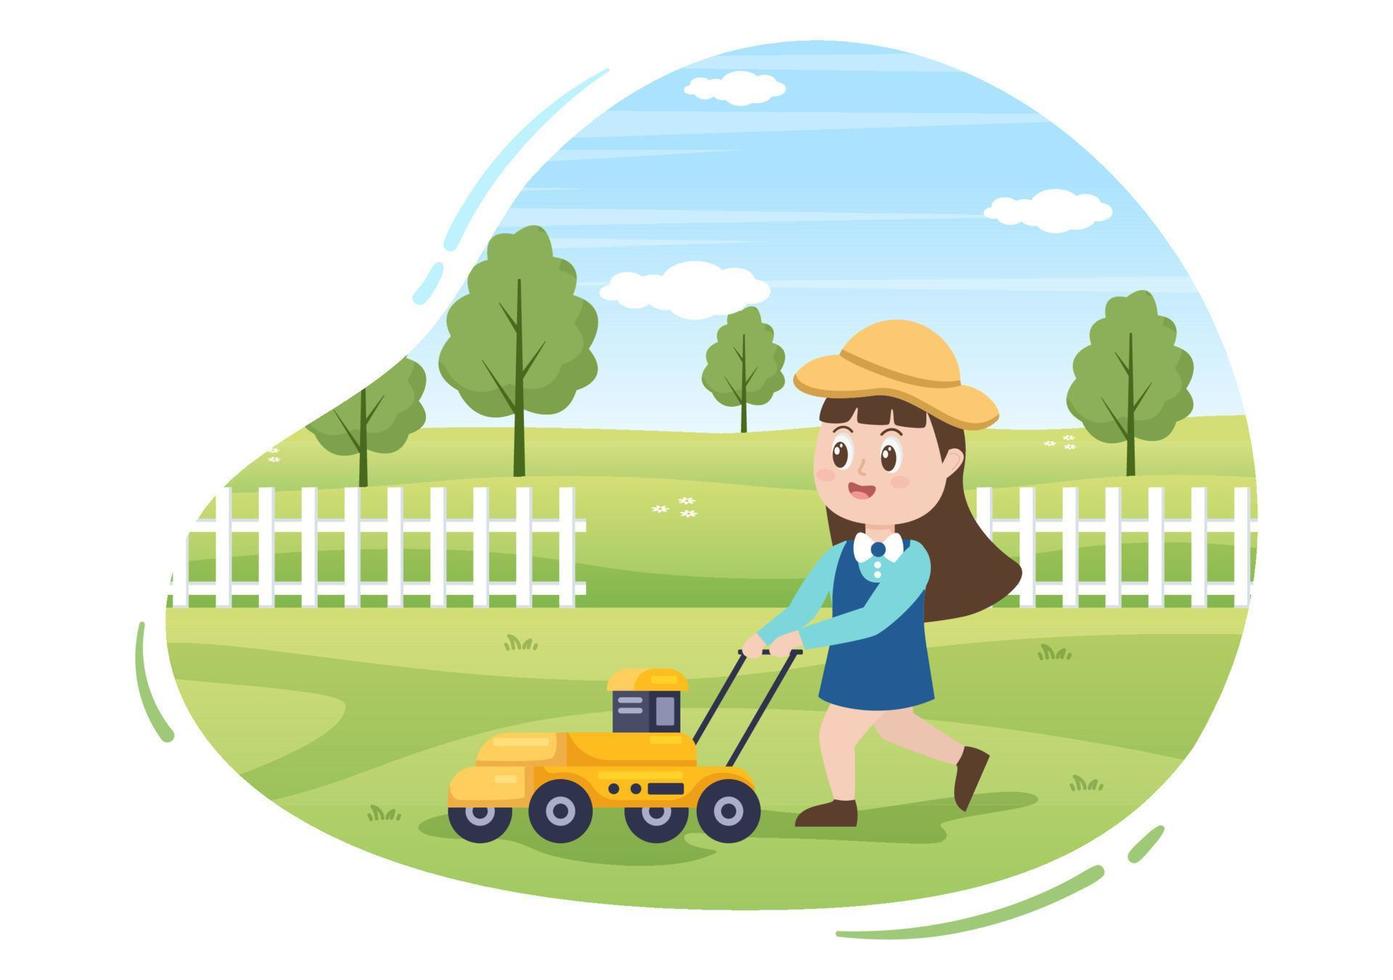 Lawn Mower Cutting Green Grass, Trimming and Care on Page or Garden in Flat Cute Cartoon Illustration vector